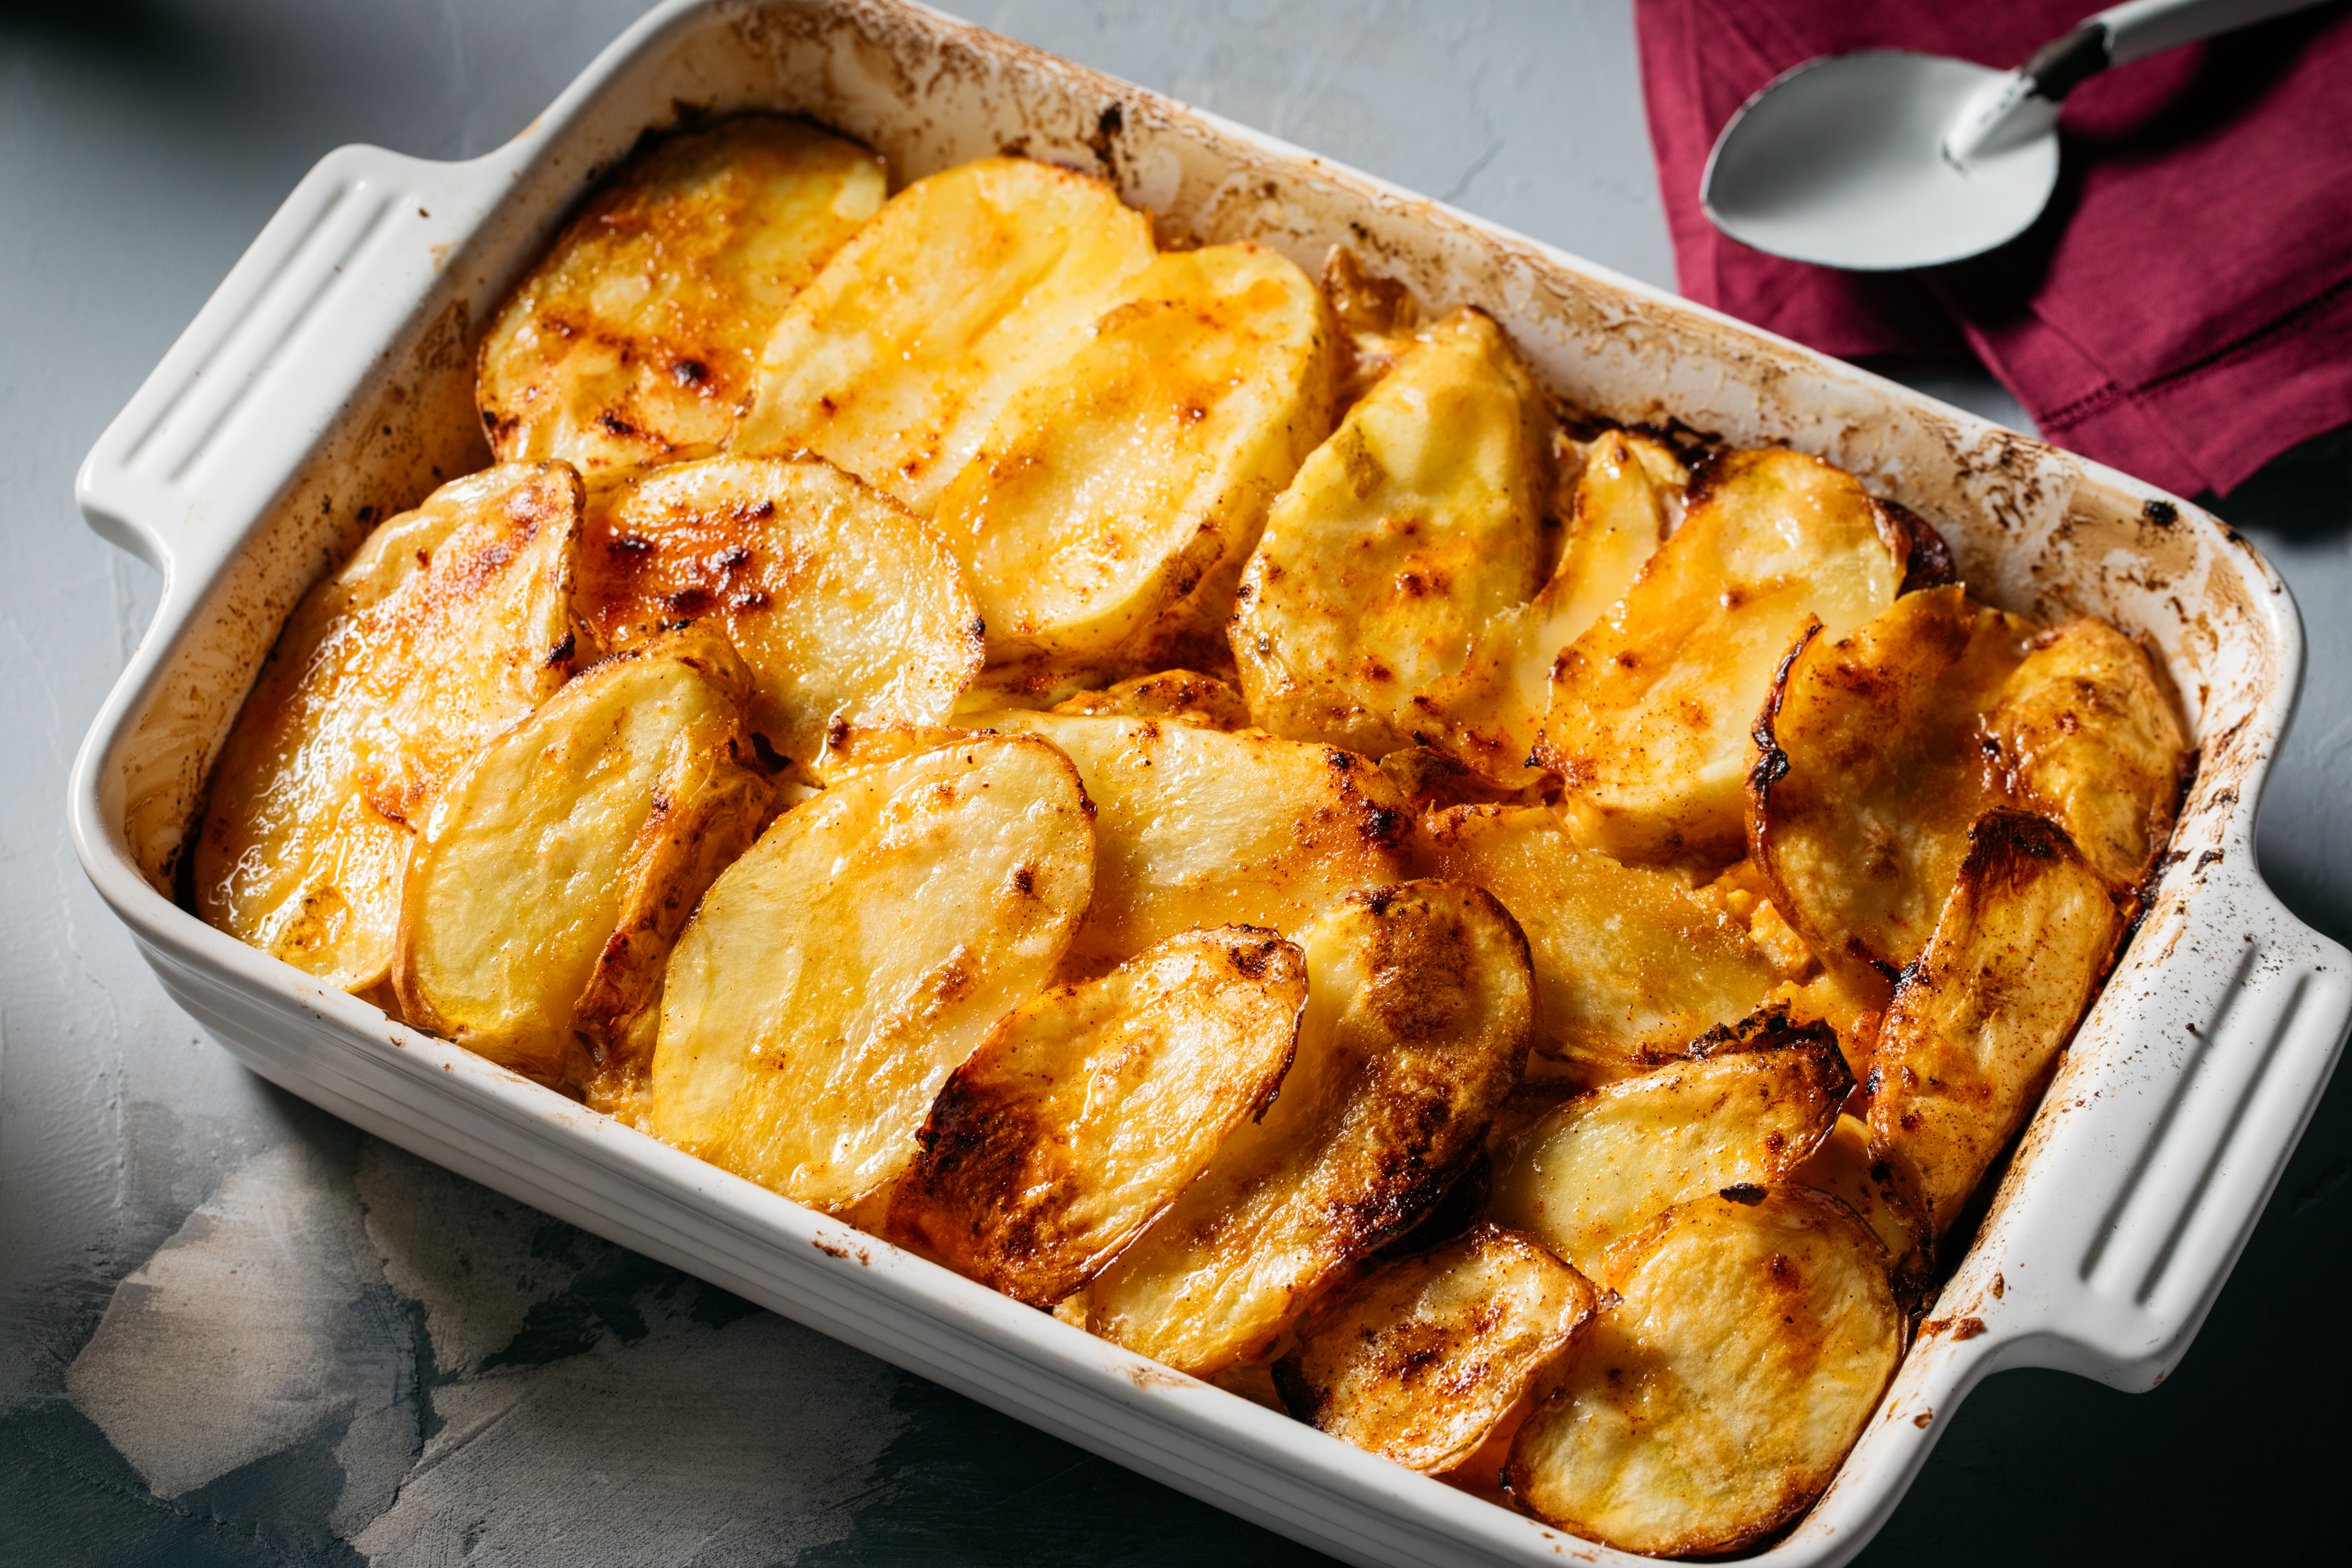 A Rakott Krumpli or Hungarian Potato Bake cooked on the TV Show on SBS The Cook Up with Adam Liaw